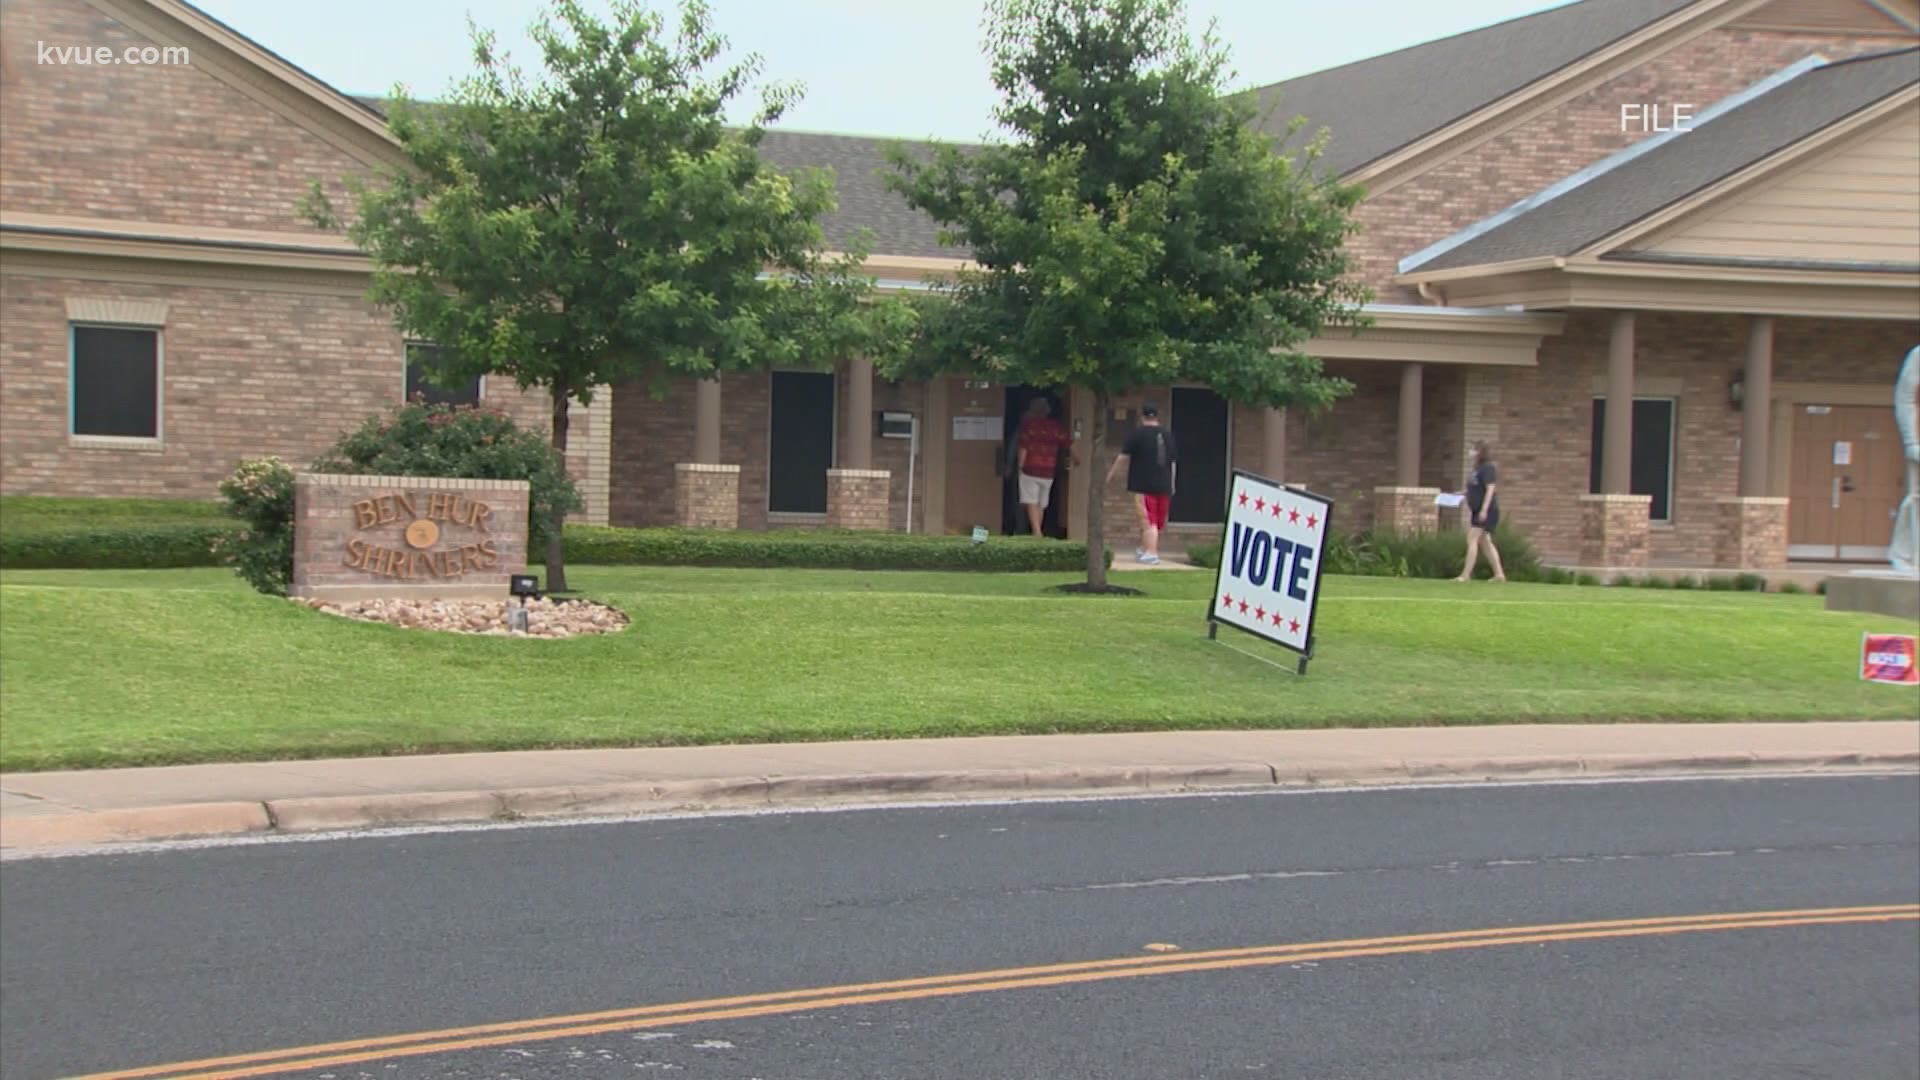 A U.S. district judge has blocked Texas from eliminating straight-ticket voting in November.